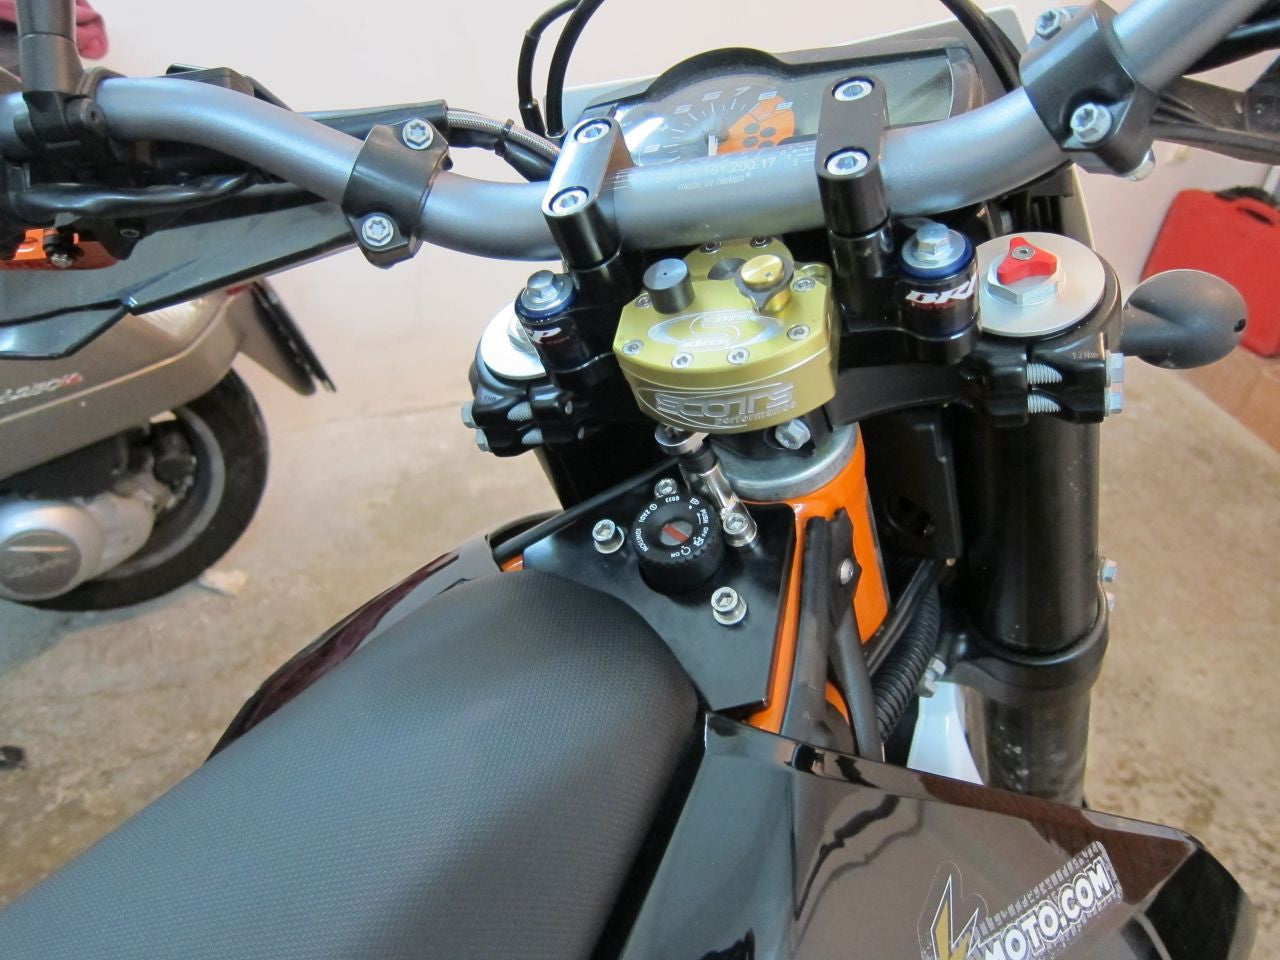 Scotts steering stabilizer and BRP rubber mounted sub mount for KTM 690 Enduro